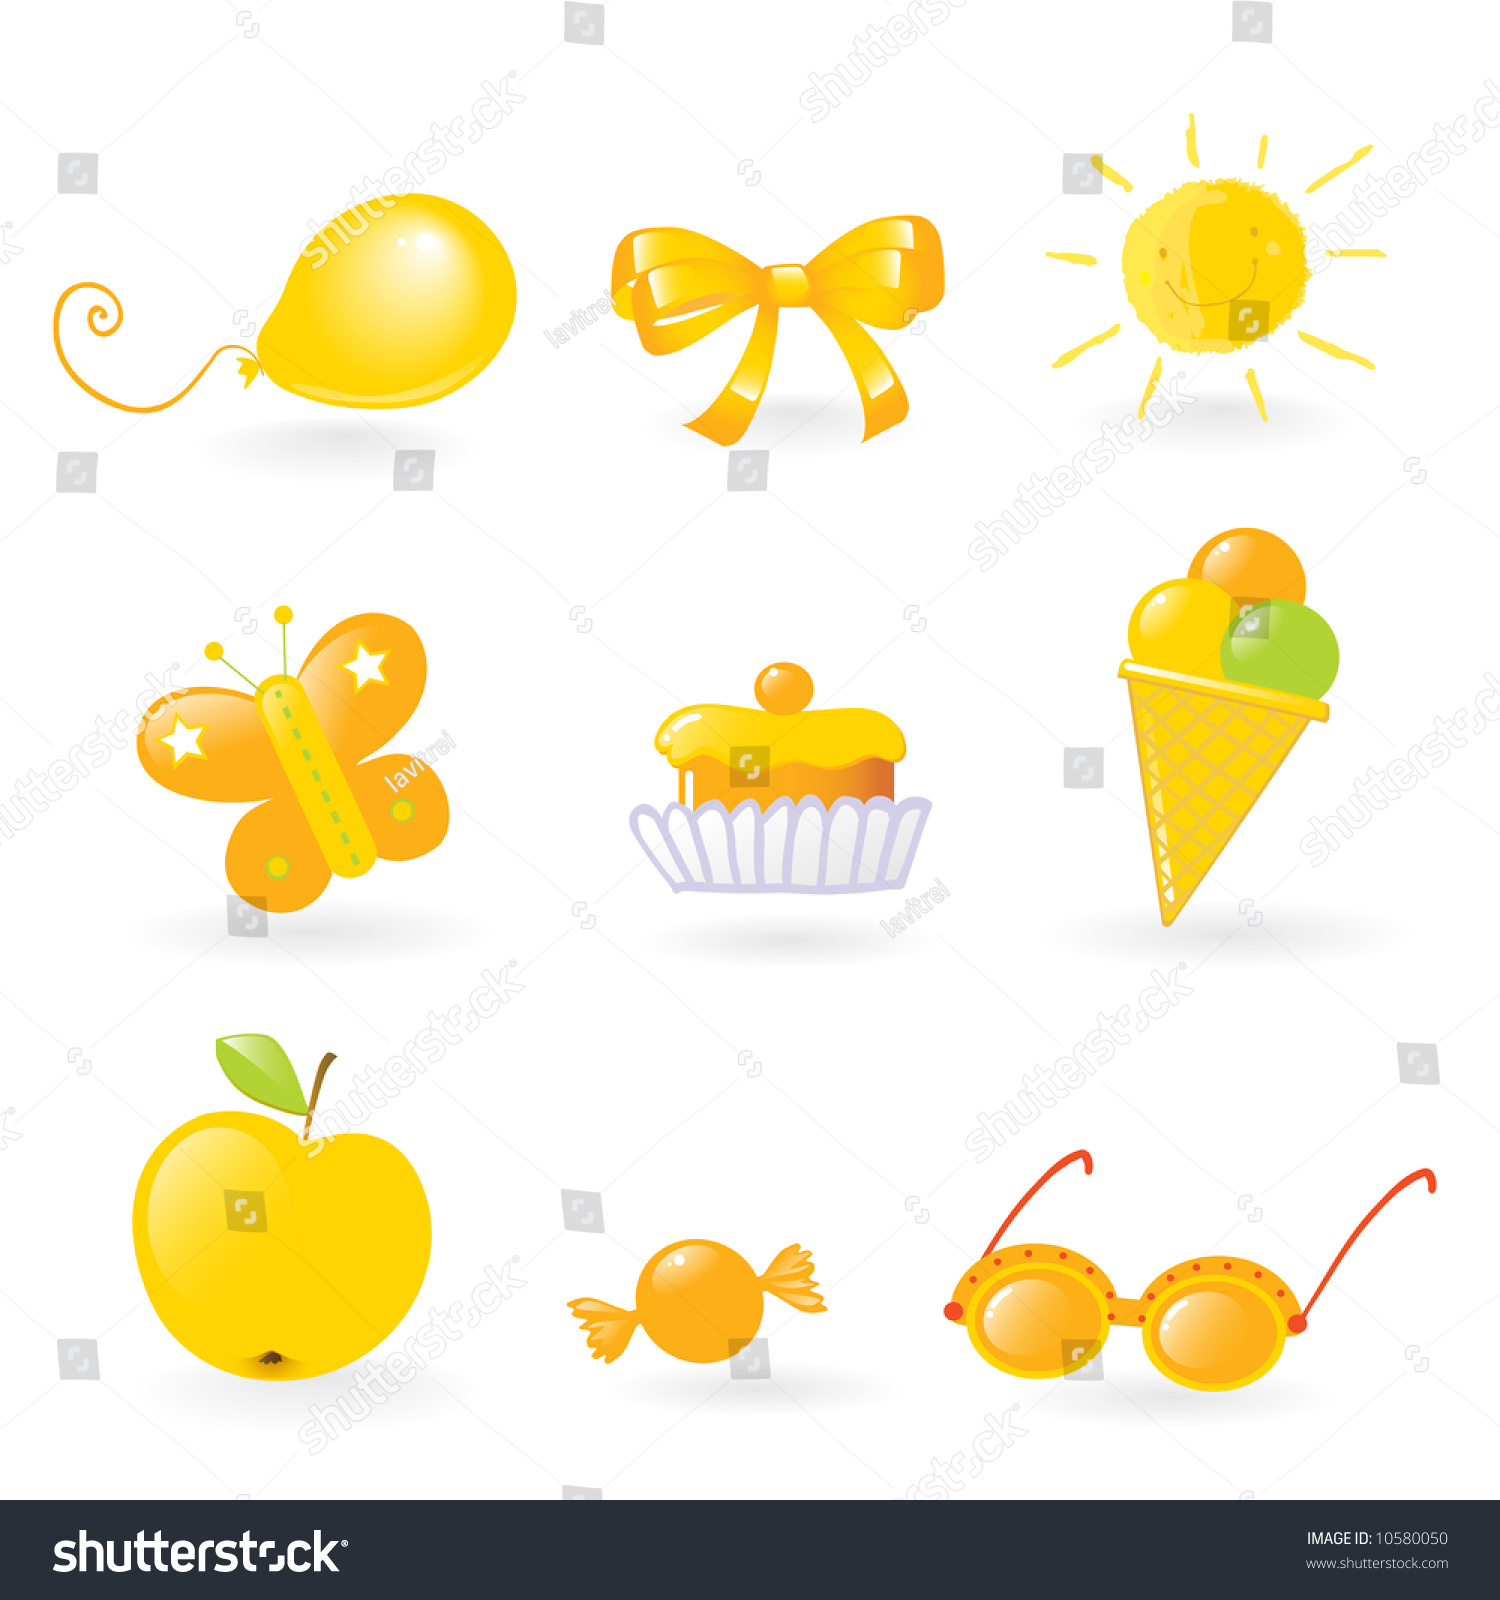 clipart of different objects - photo #25